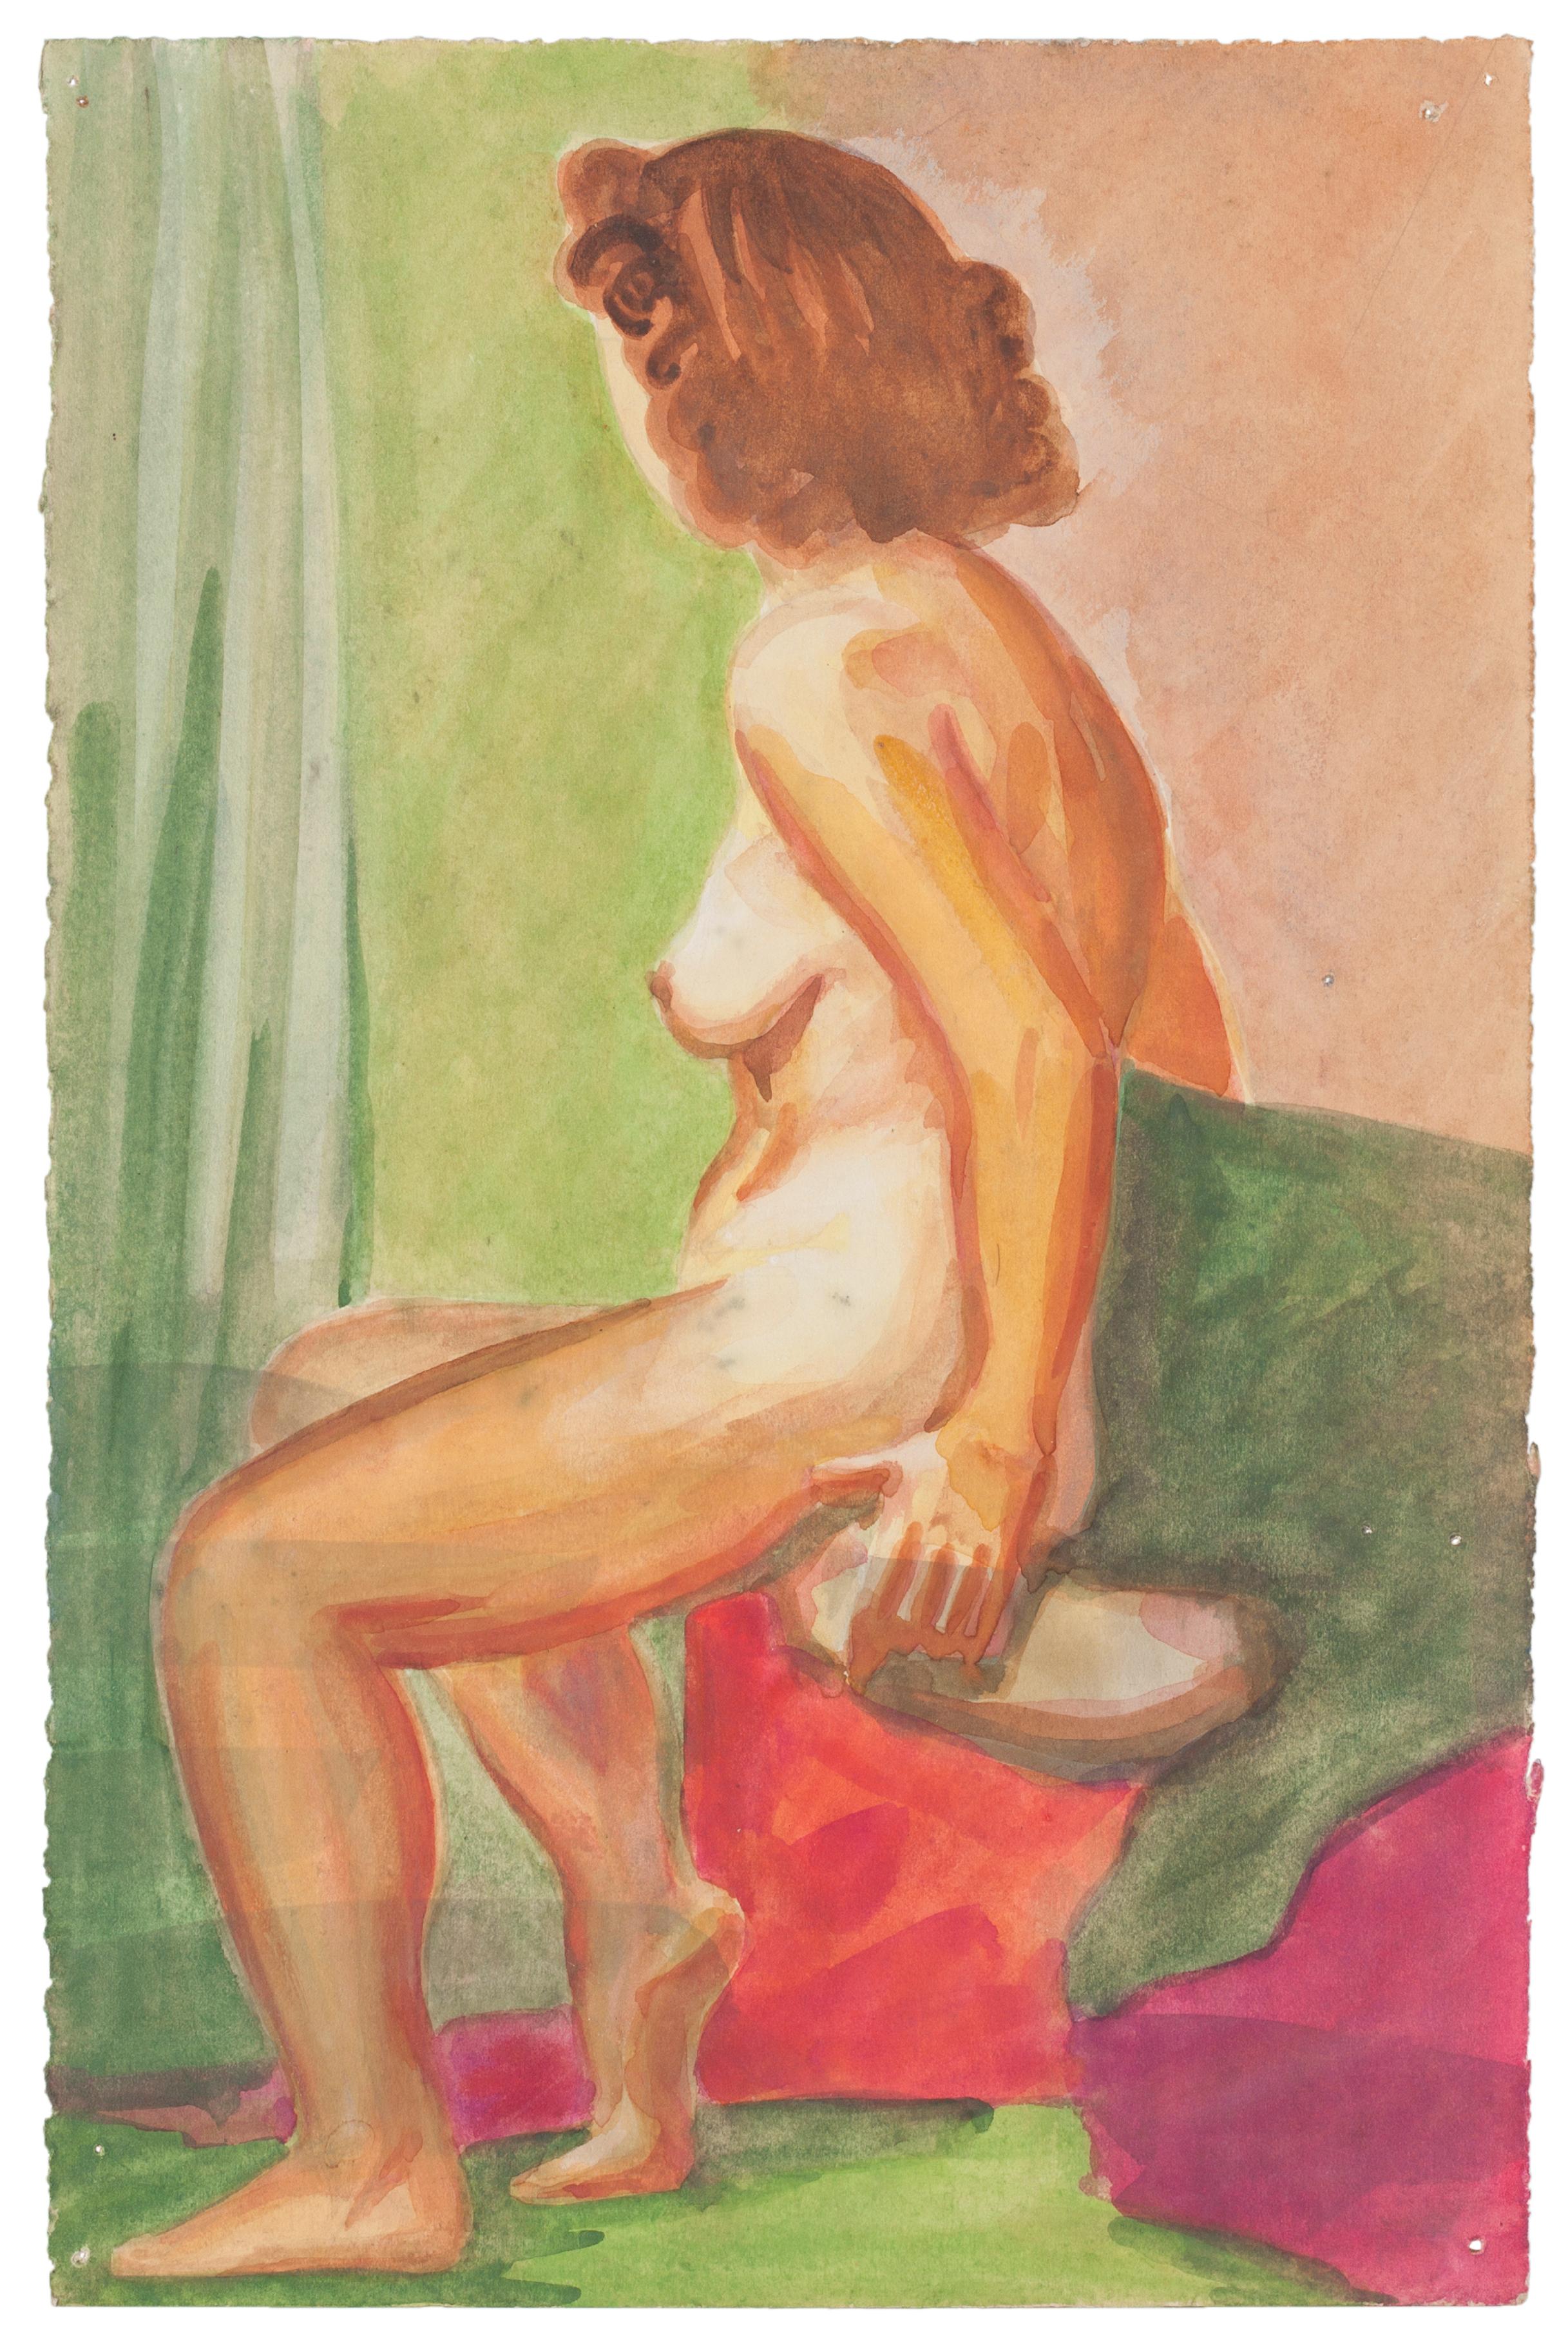 Nude is an original drawing intempera and watercolor a on paper, realized by Jean Delpech (1988-1916). 

Sheet dimension: 27.2 x 17.8 cm.

The artwork represents a nude seated woman, skillfully created, through delicate lines and vivid